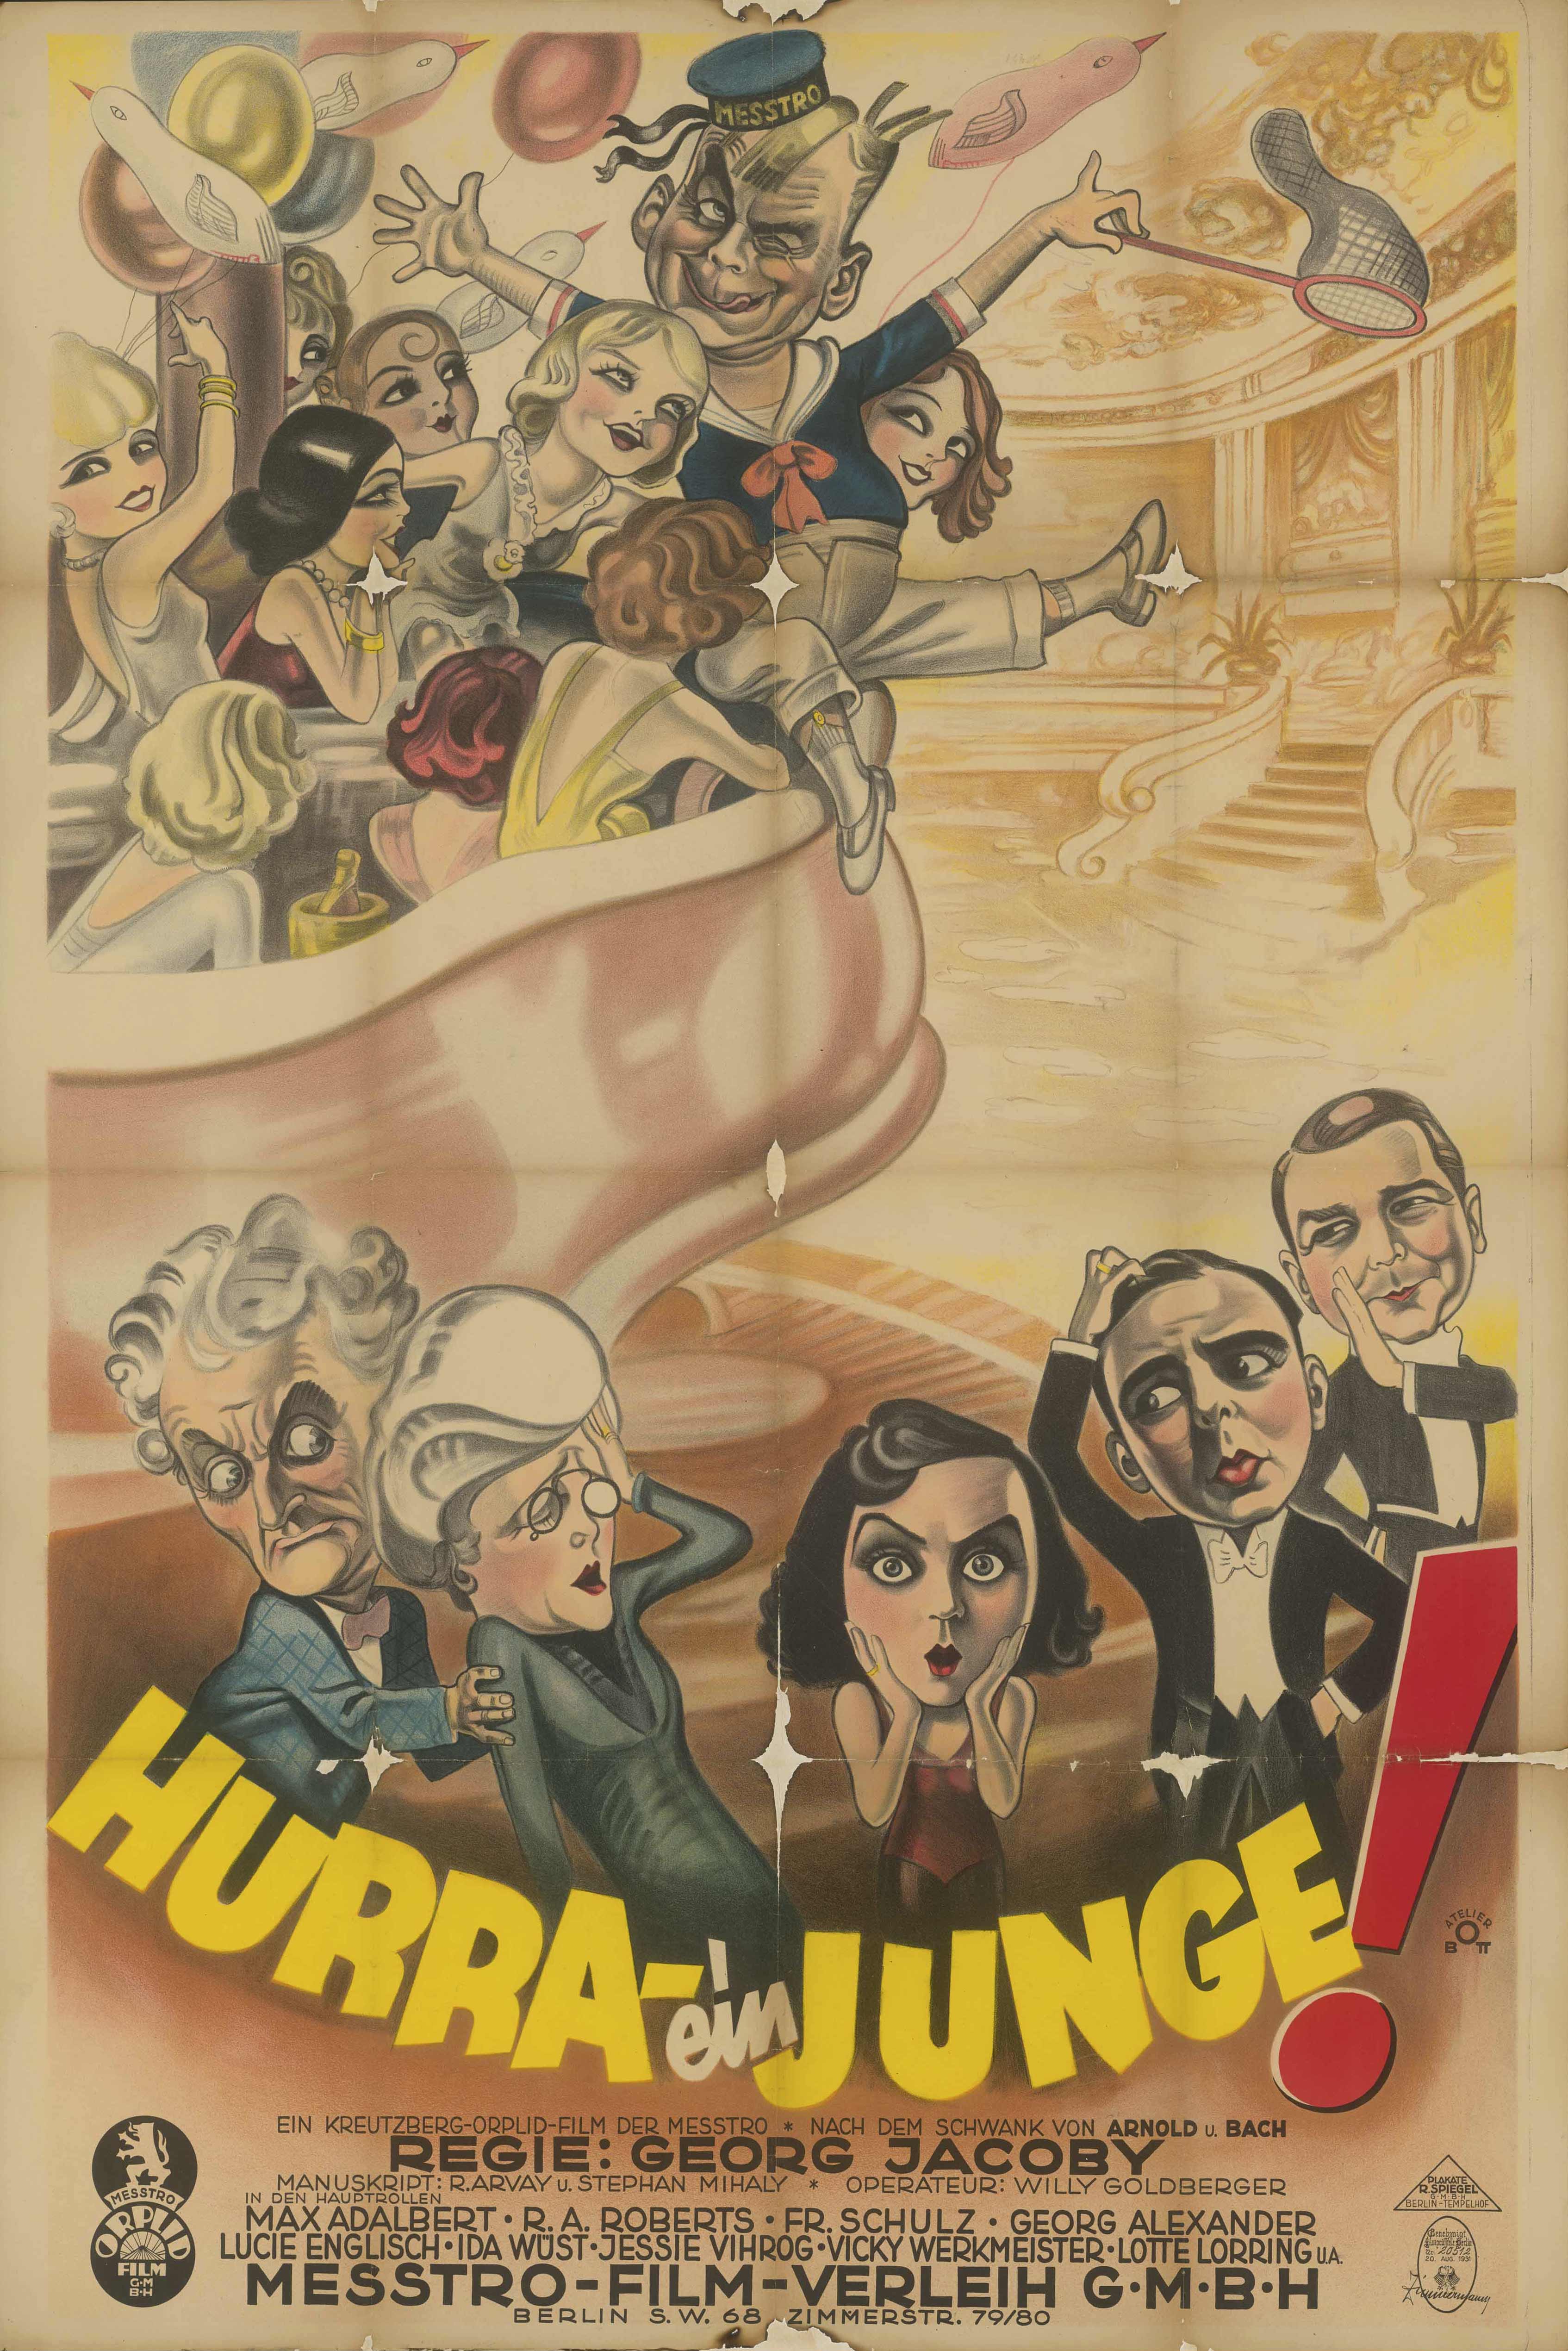 Film poster for Hurra – ein Junge!, Germany 1931